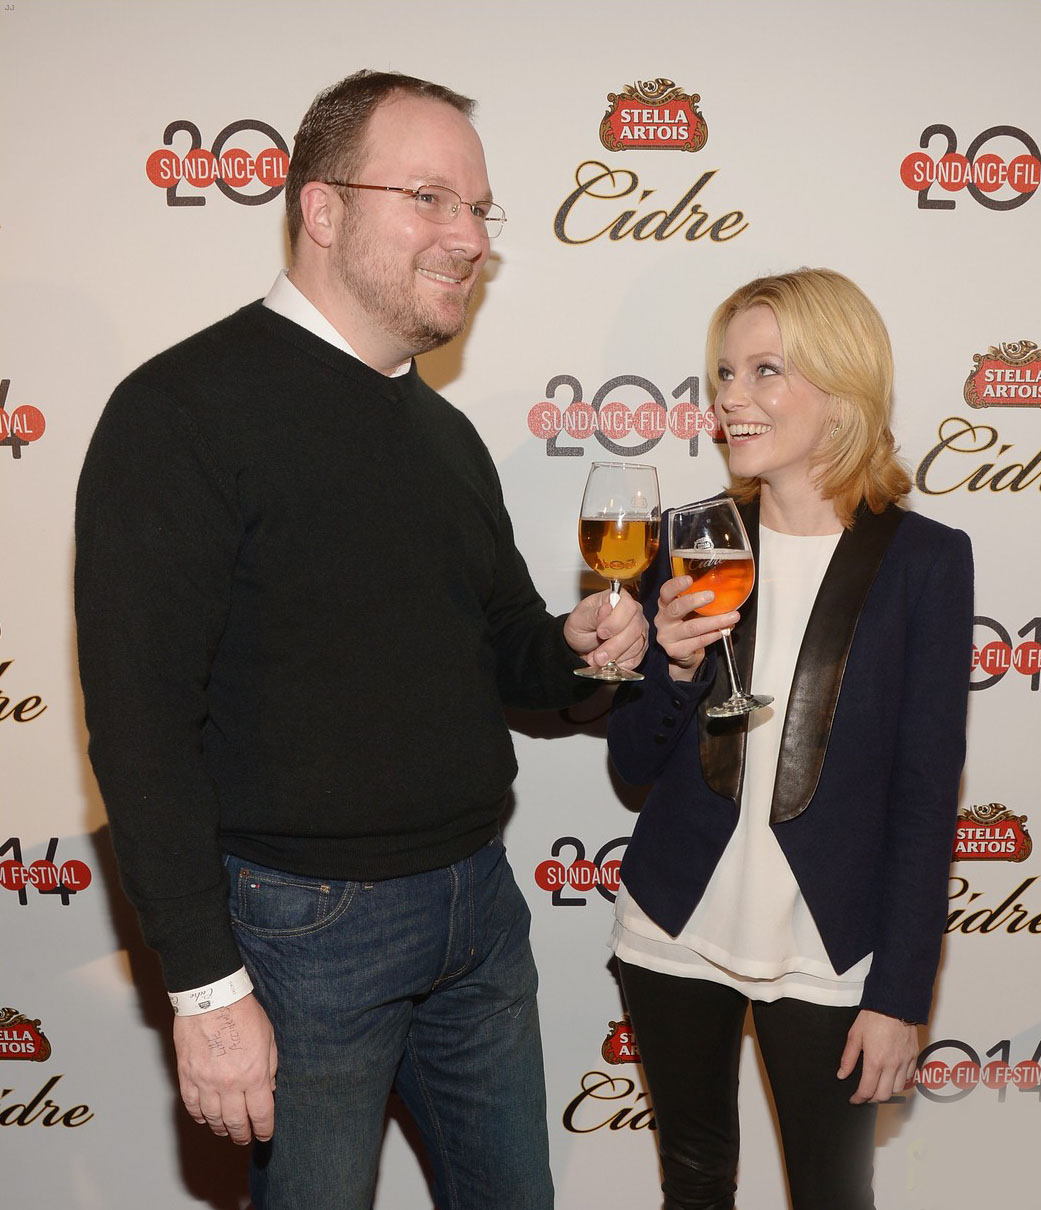 Elizabeth Banks keeps it chic while attending the Stella Artois Cidre National Launch Party